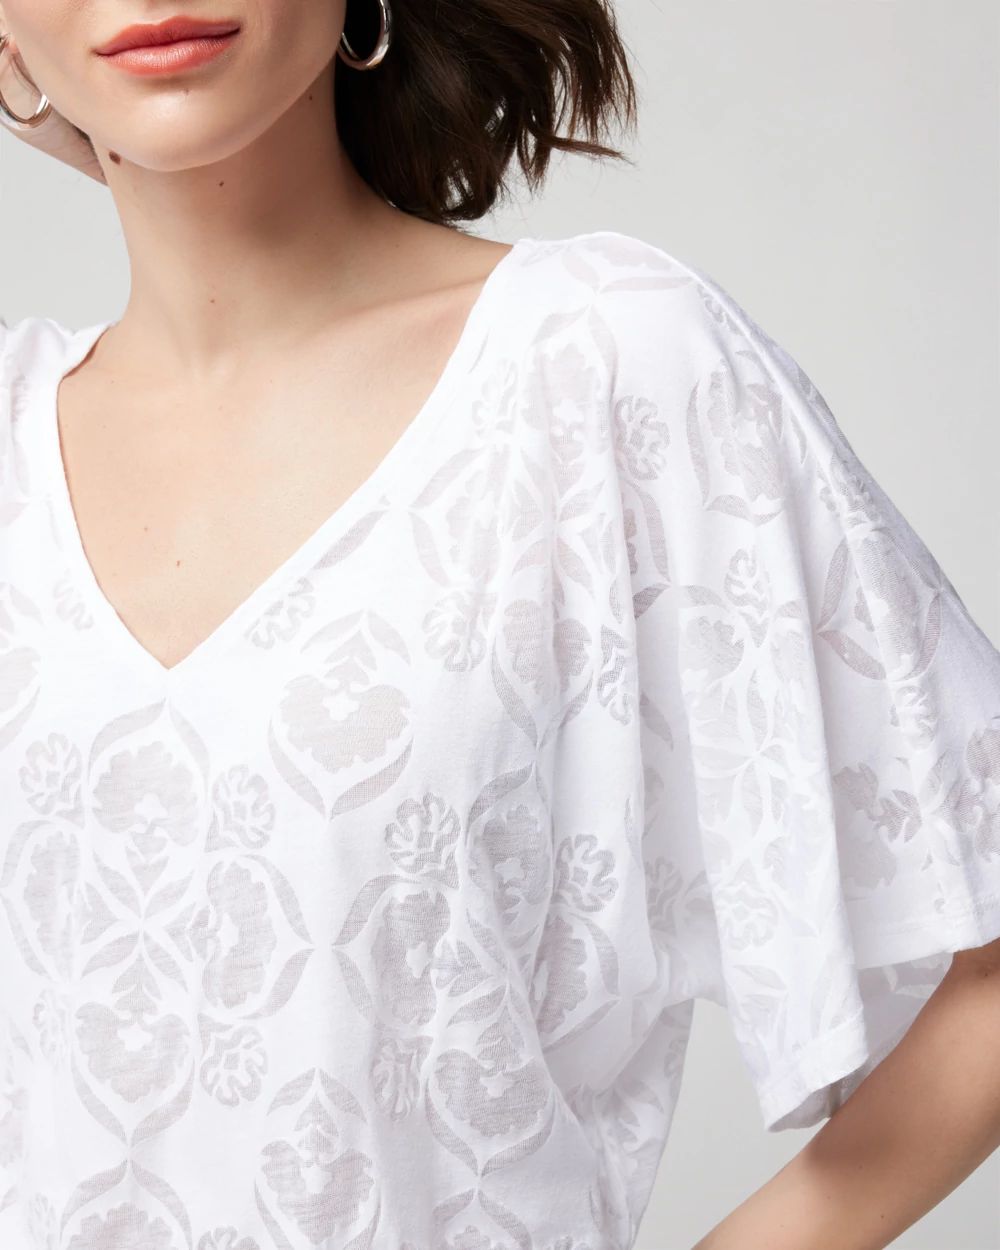 Short-Sleeve Kimono Top click to view larger image.